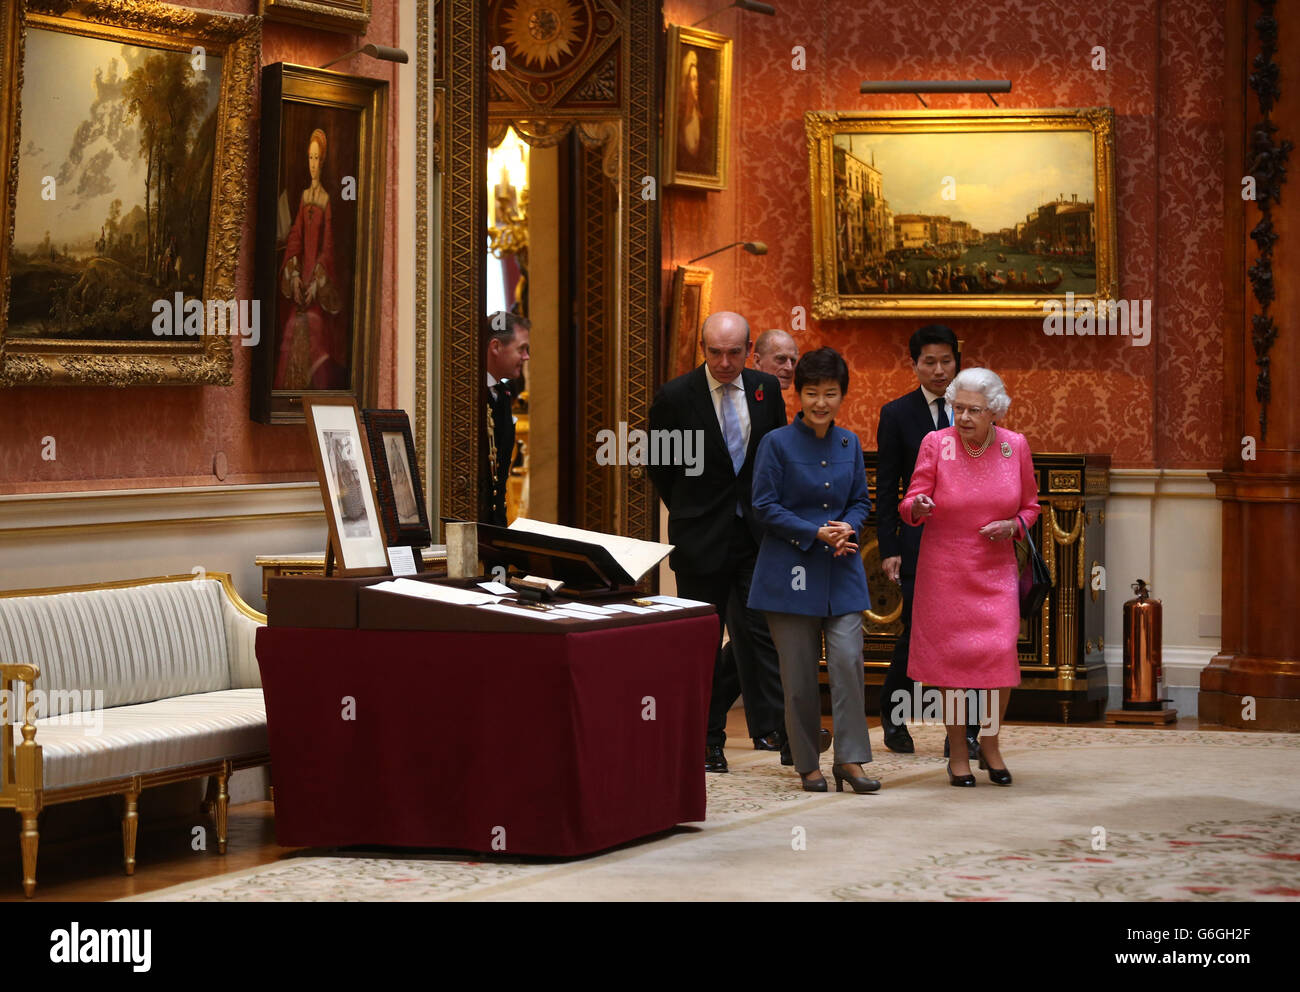 The President of the Republic of Korea Park Geun-Hye (centre), the Duke of Edinburgh (second left) and Queen Elizabeth II (right) arrive to look at an exhibition of Korean related items from the Royal Collection and Royal Archives in the Picture Gallery of Buckingham Palace in London, England. The President of the Republic of Korea Park Geun-Hye is on a State Visit to the United Kingdom and during the trip she will attend a state banquet and visit Downing Street. Stock Photo